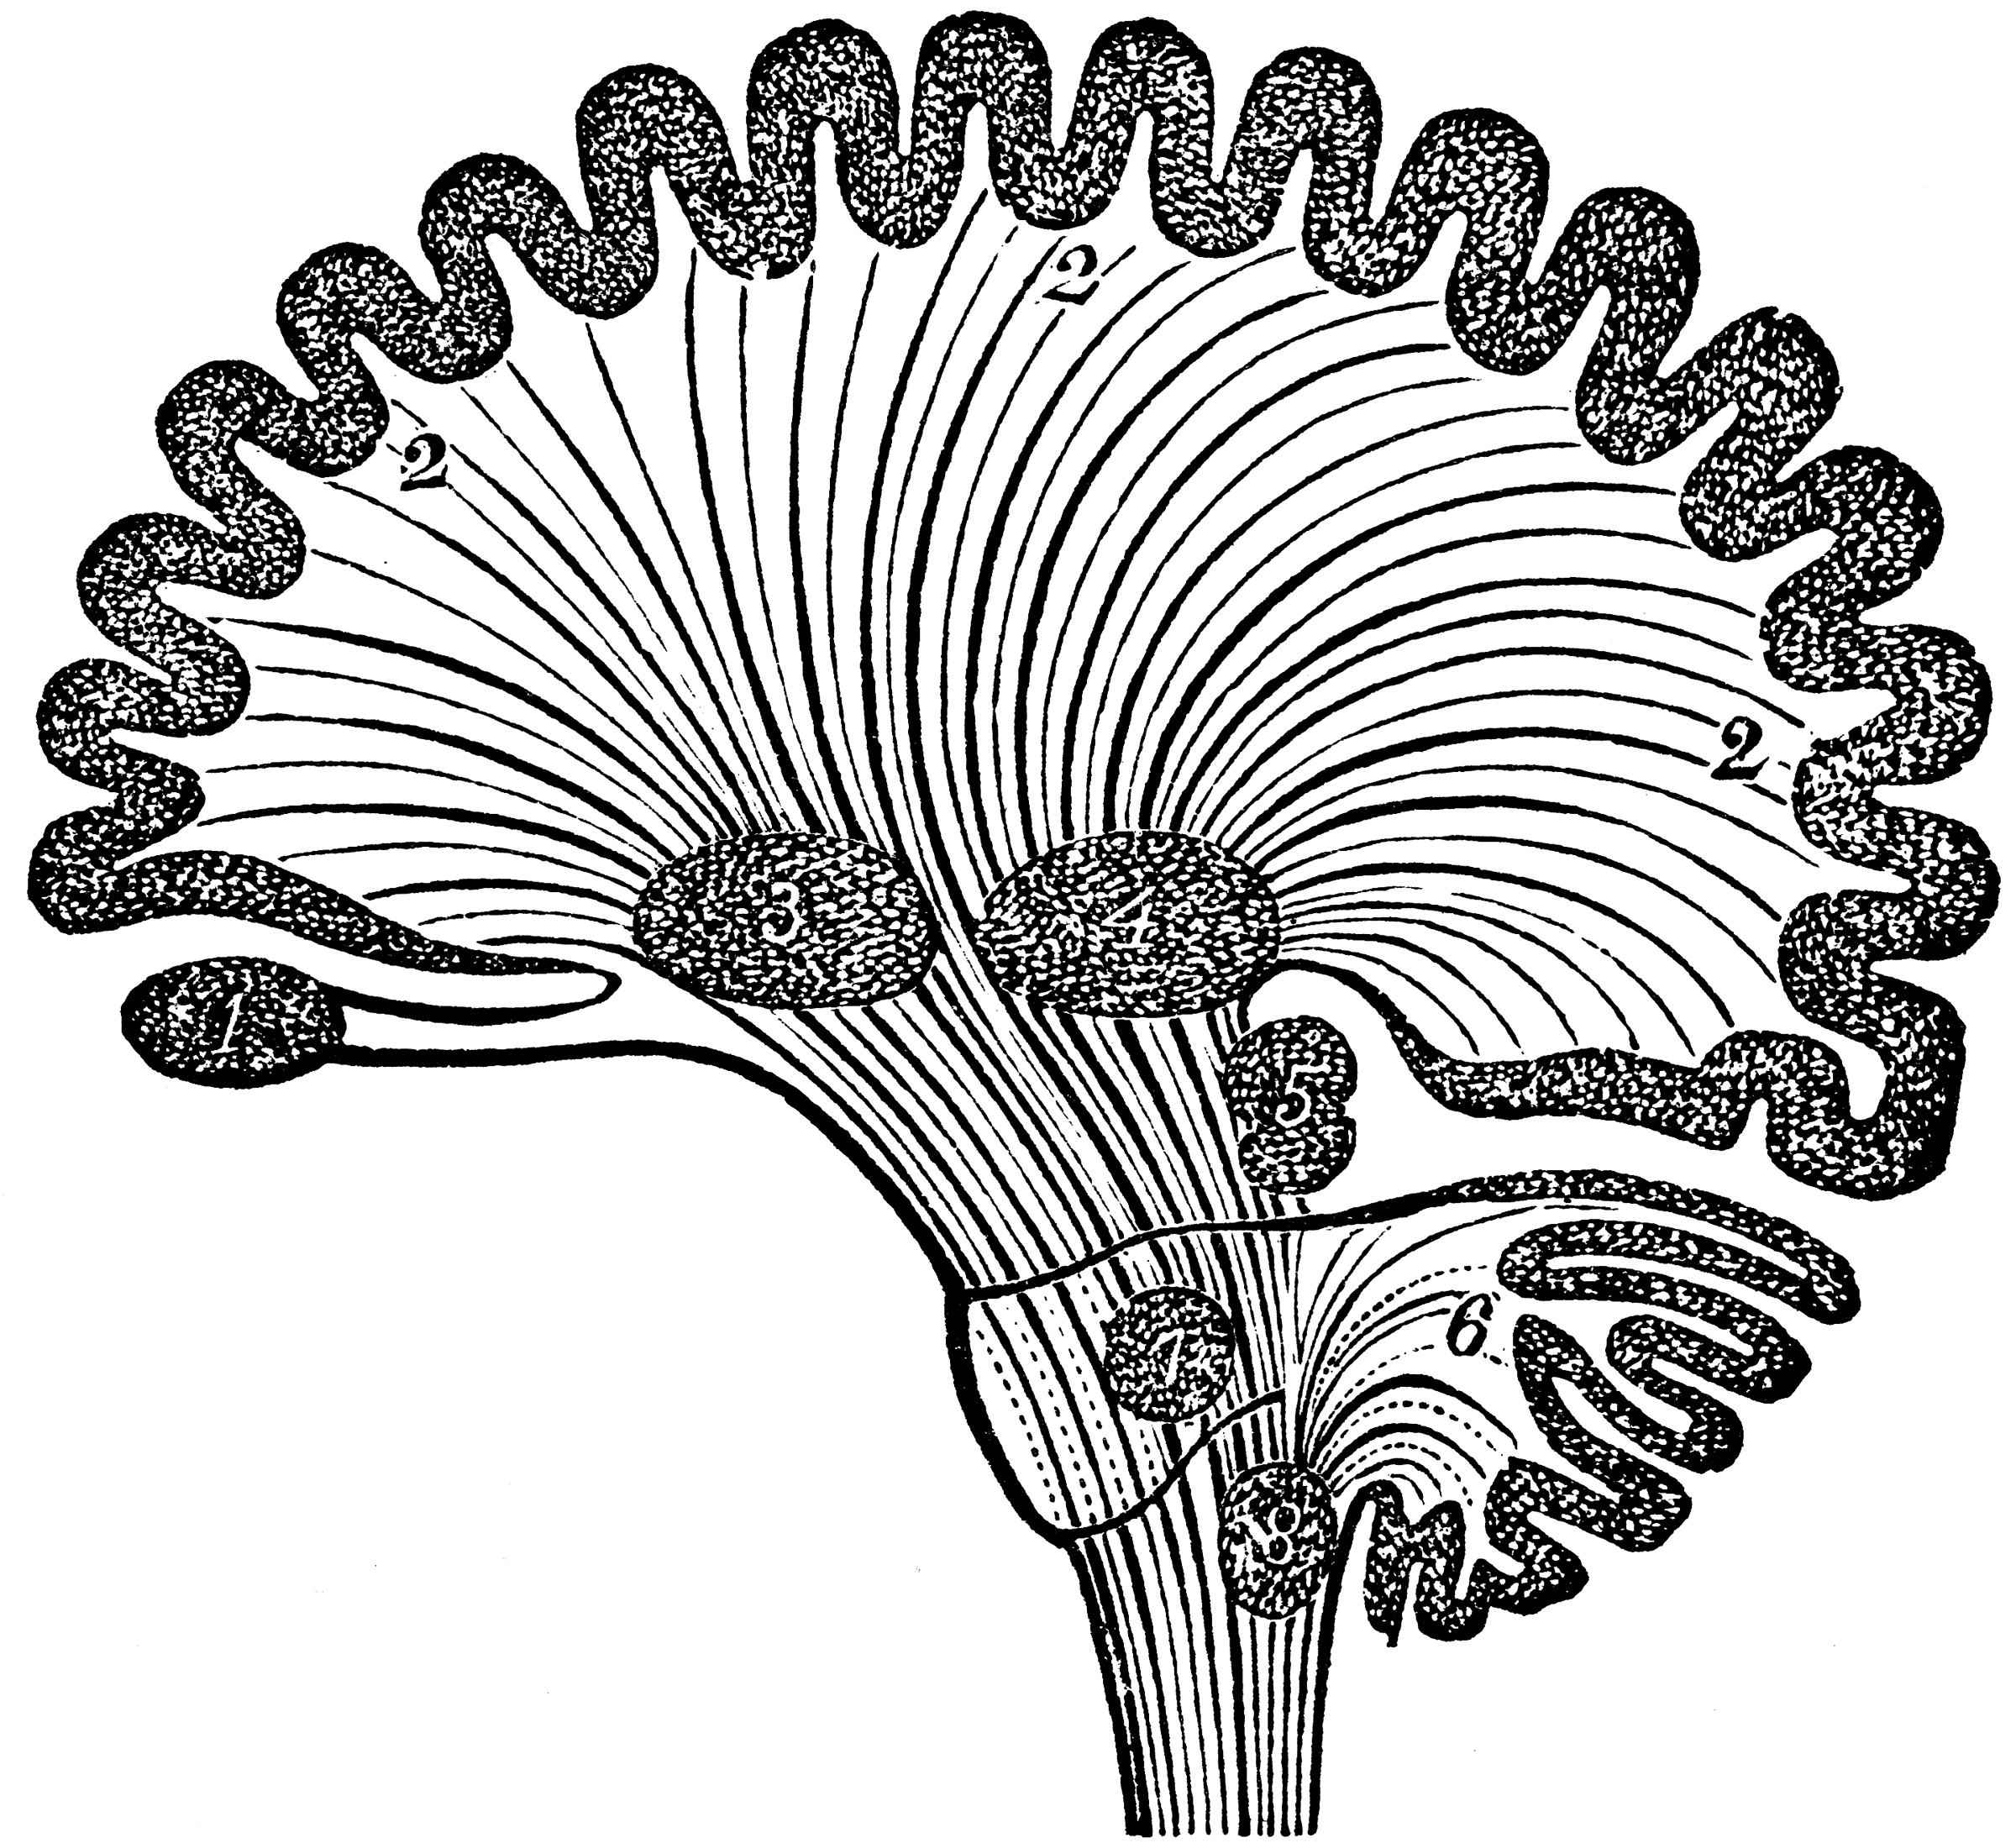 Diagram of Human Brain in Vertical Section | ClipArt ETC